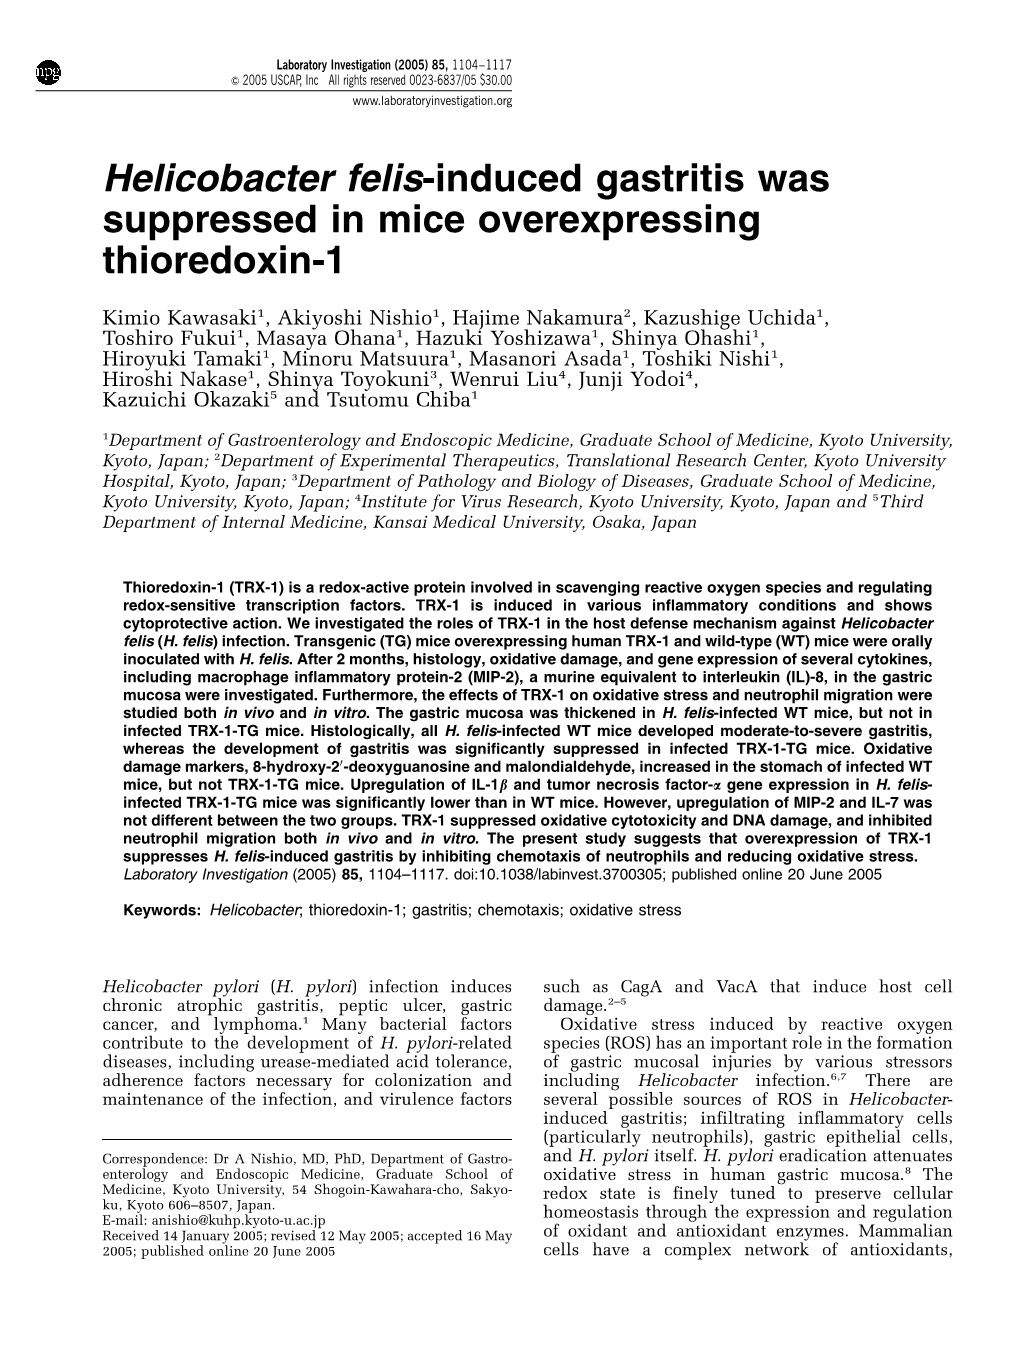 Helicobacter Felis-Induced Gastritis Was Suppressed in Mice Overexpressing Thioredoxin-1